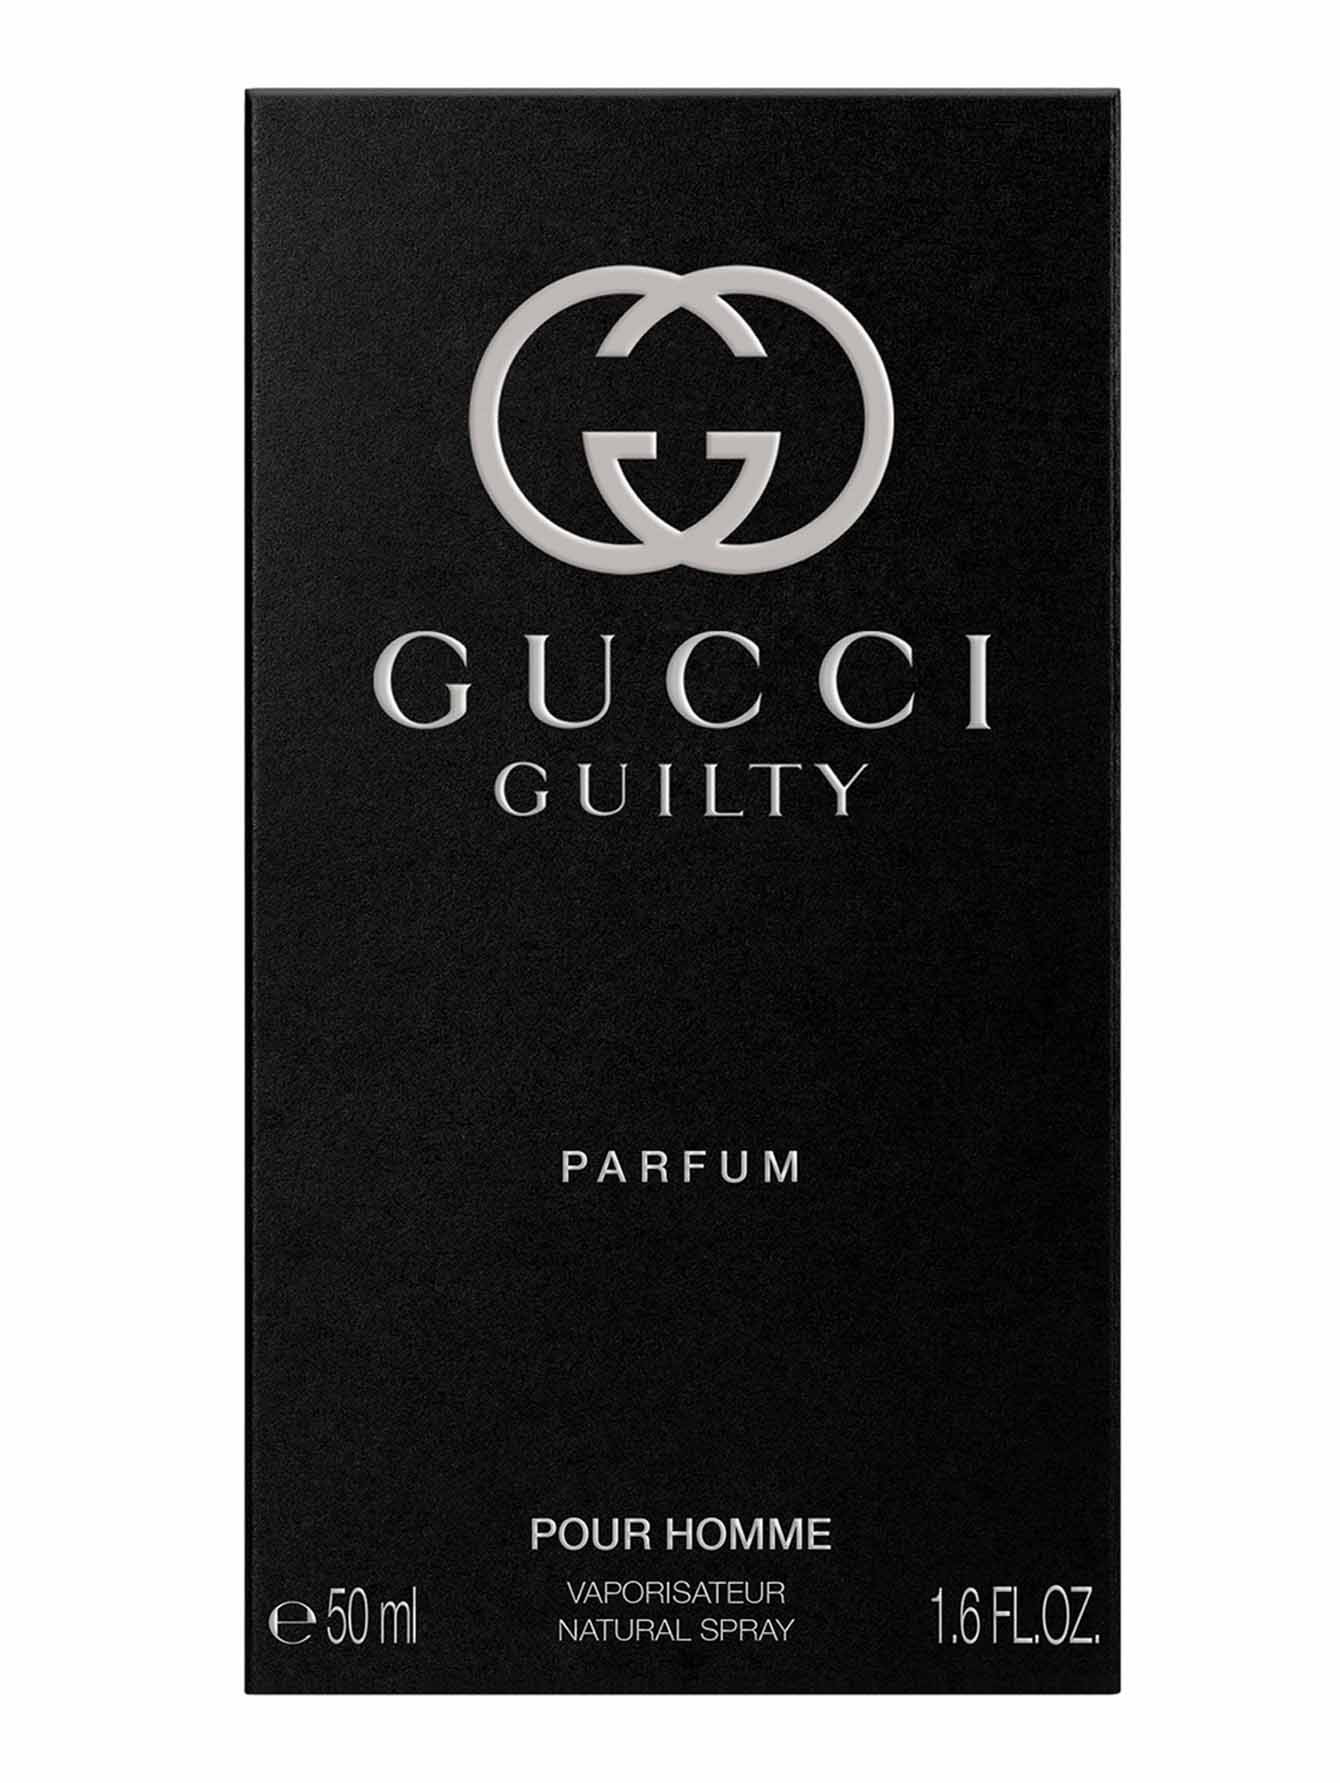 Духи Guilty Pour Homme, 50 мл - Обтравка1